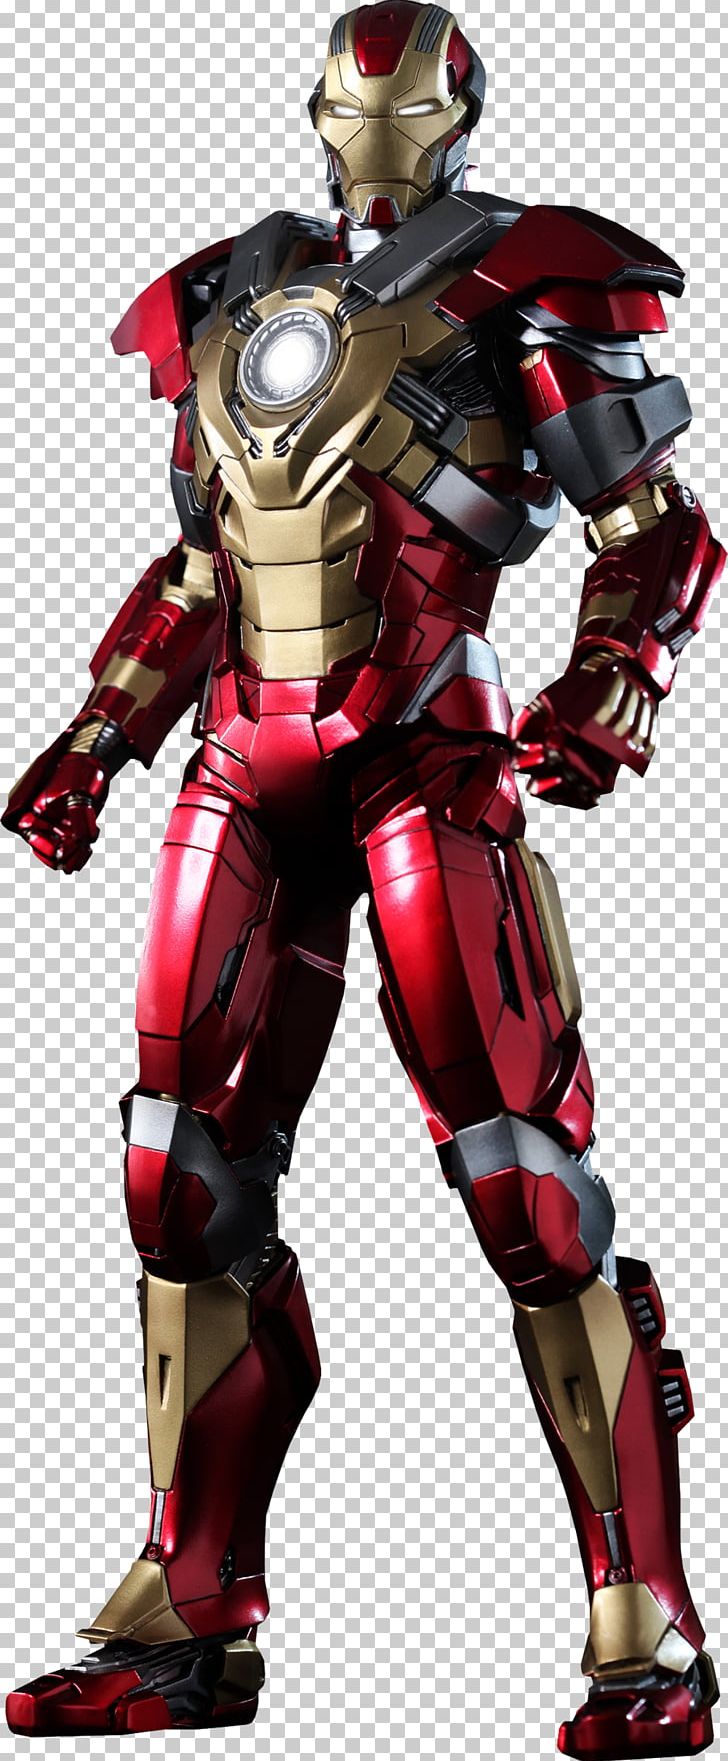 Iron Man Extremis War Machine Aldrich Killian Mark 17 Nuclear Bomb PNG, Clipart, Action Toy Figures, Aldrich Killian, Avengers, Avengers Age Of Ultron, Fictional Character Free PNG Download